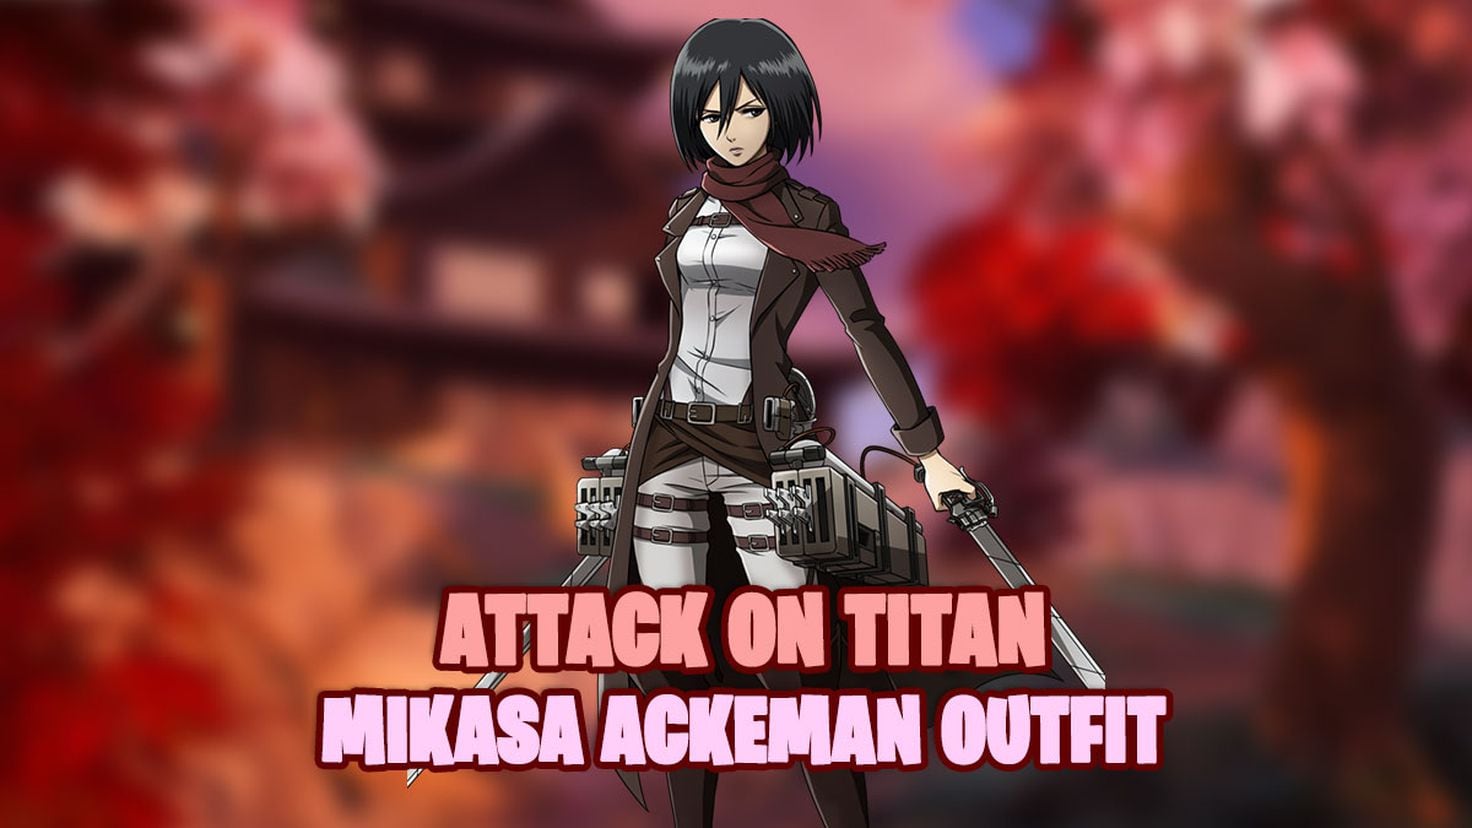 Attack on Titan's Mikasa Ackerman is coming to Fortnite as a new outfit -  Meristation